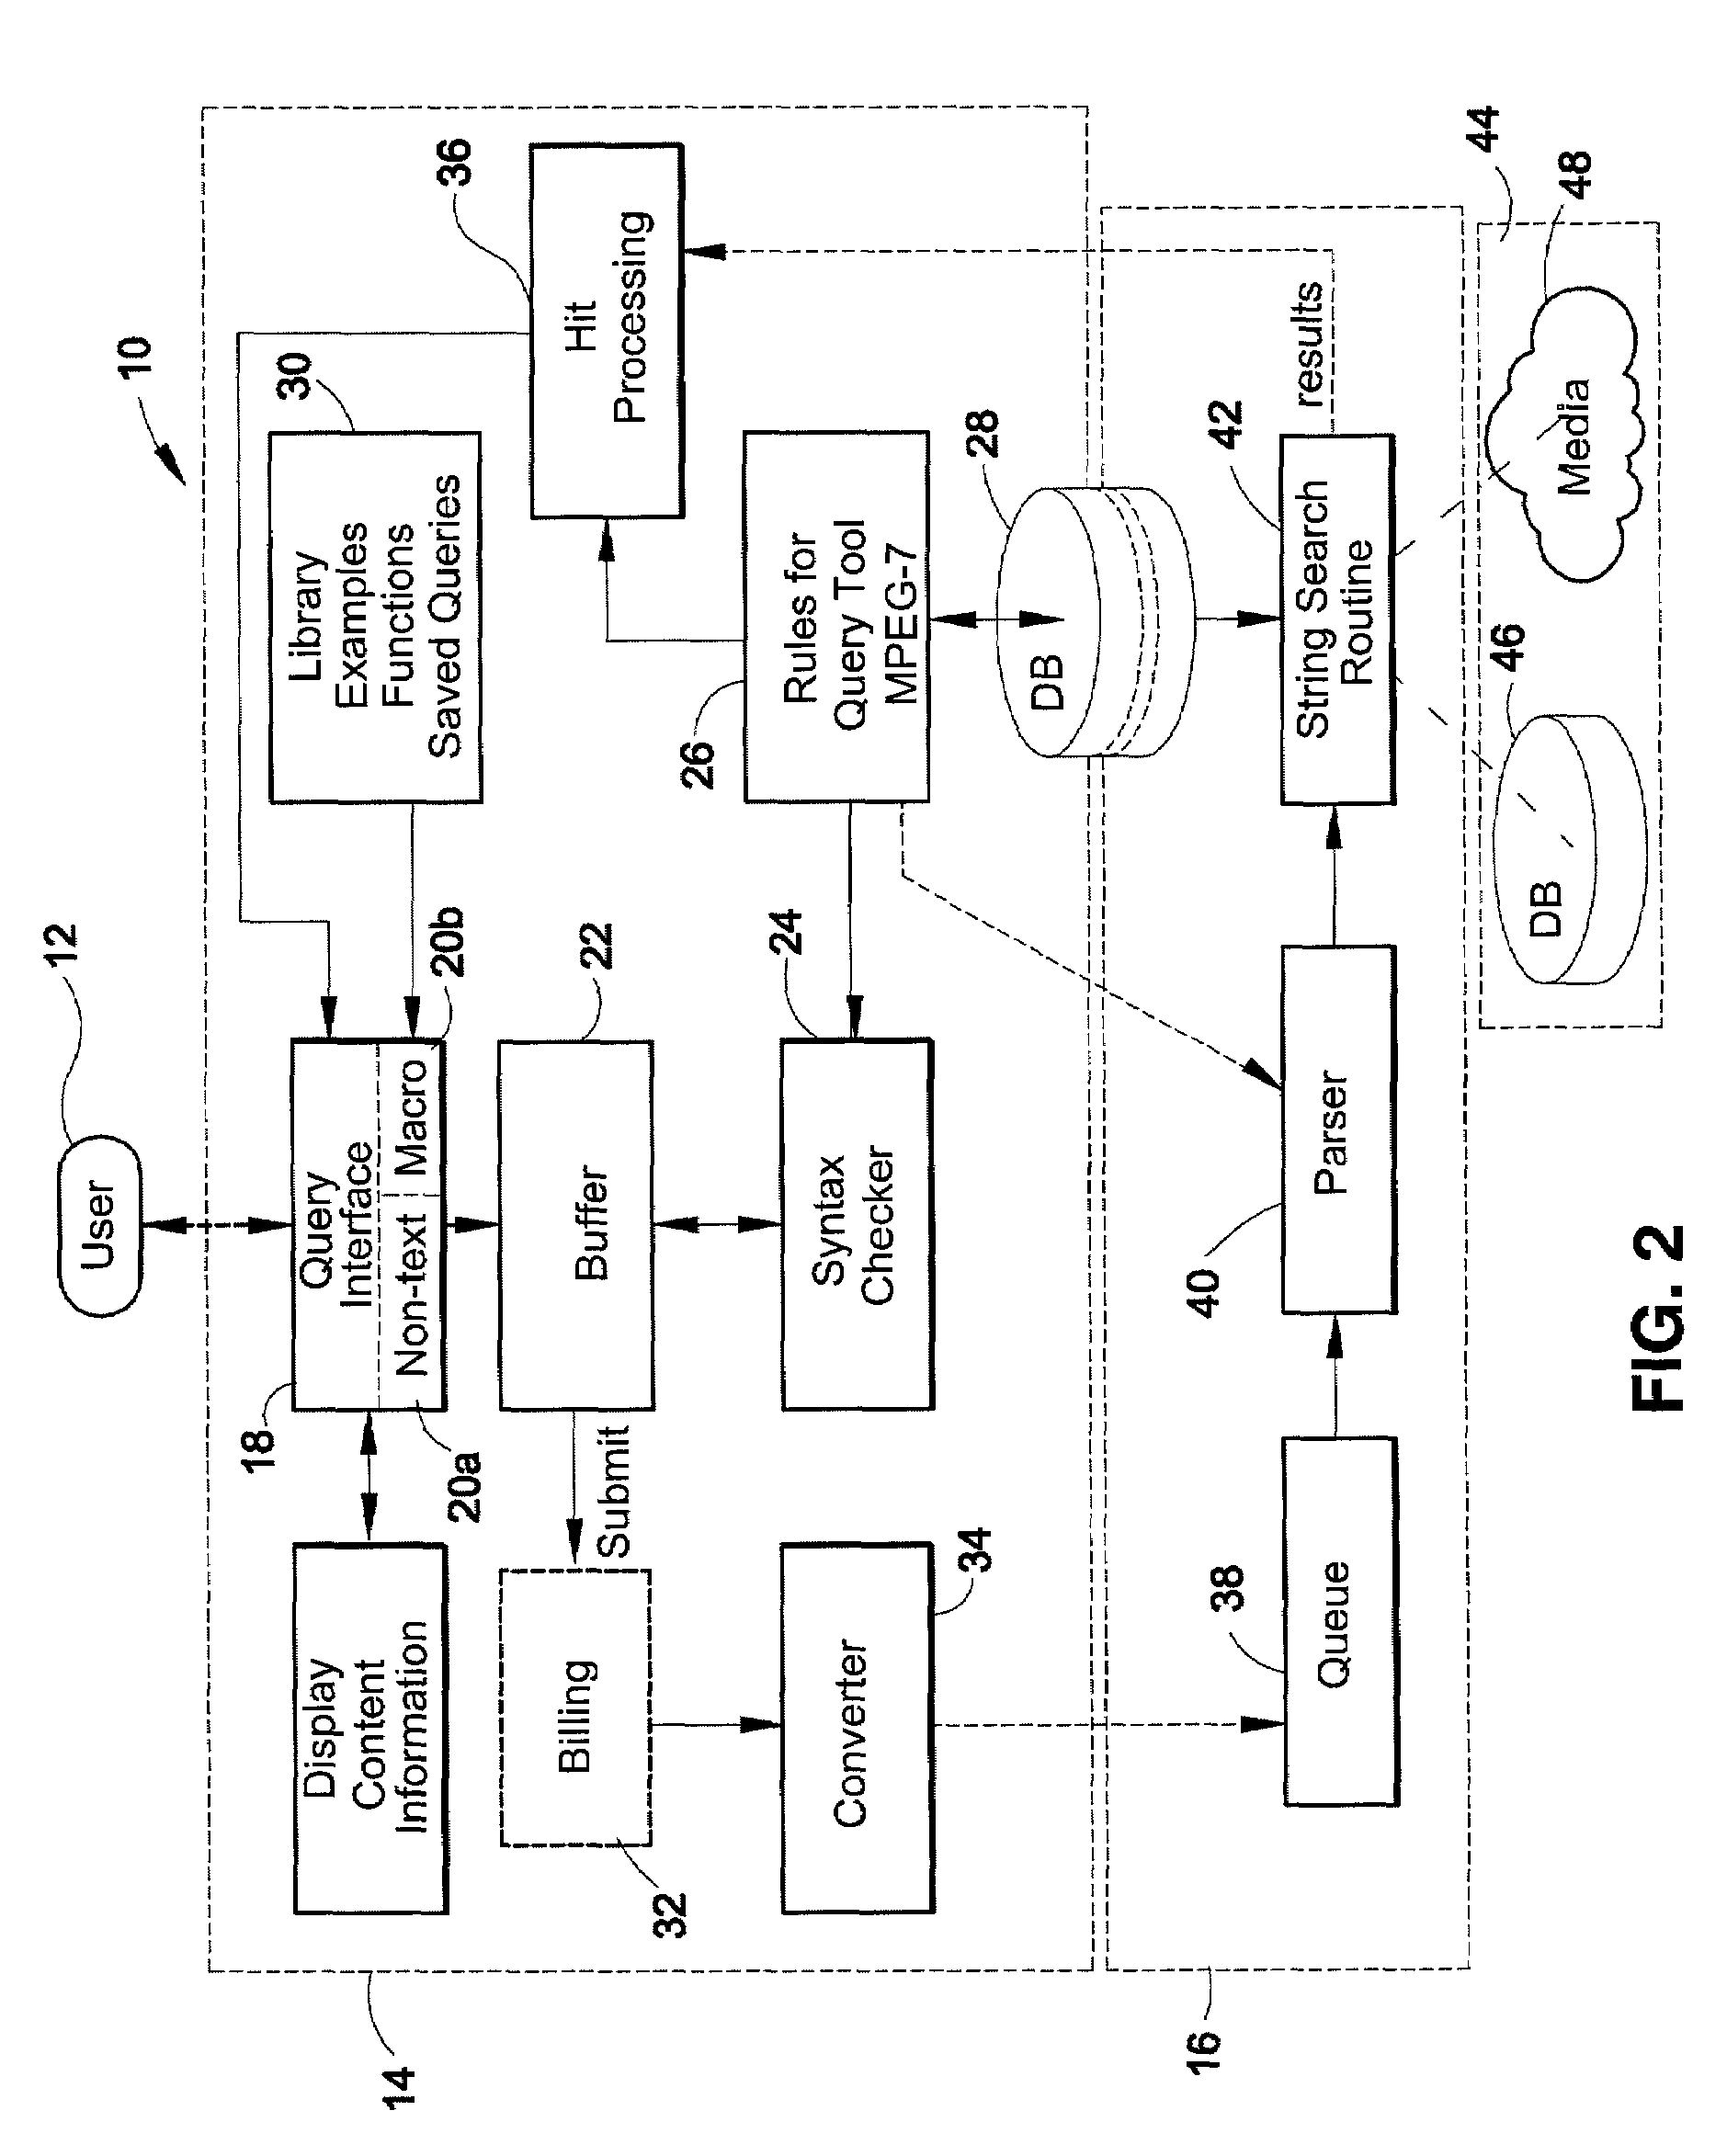 Method and system for utilizing embedded MPEG-7 content descriptions